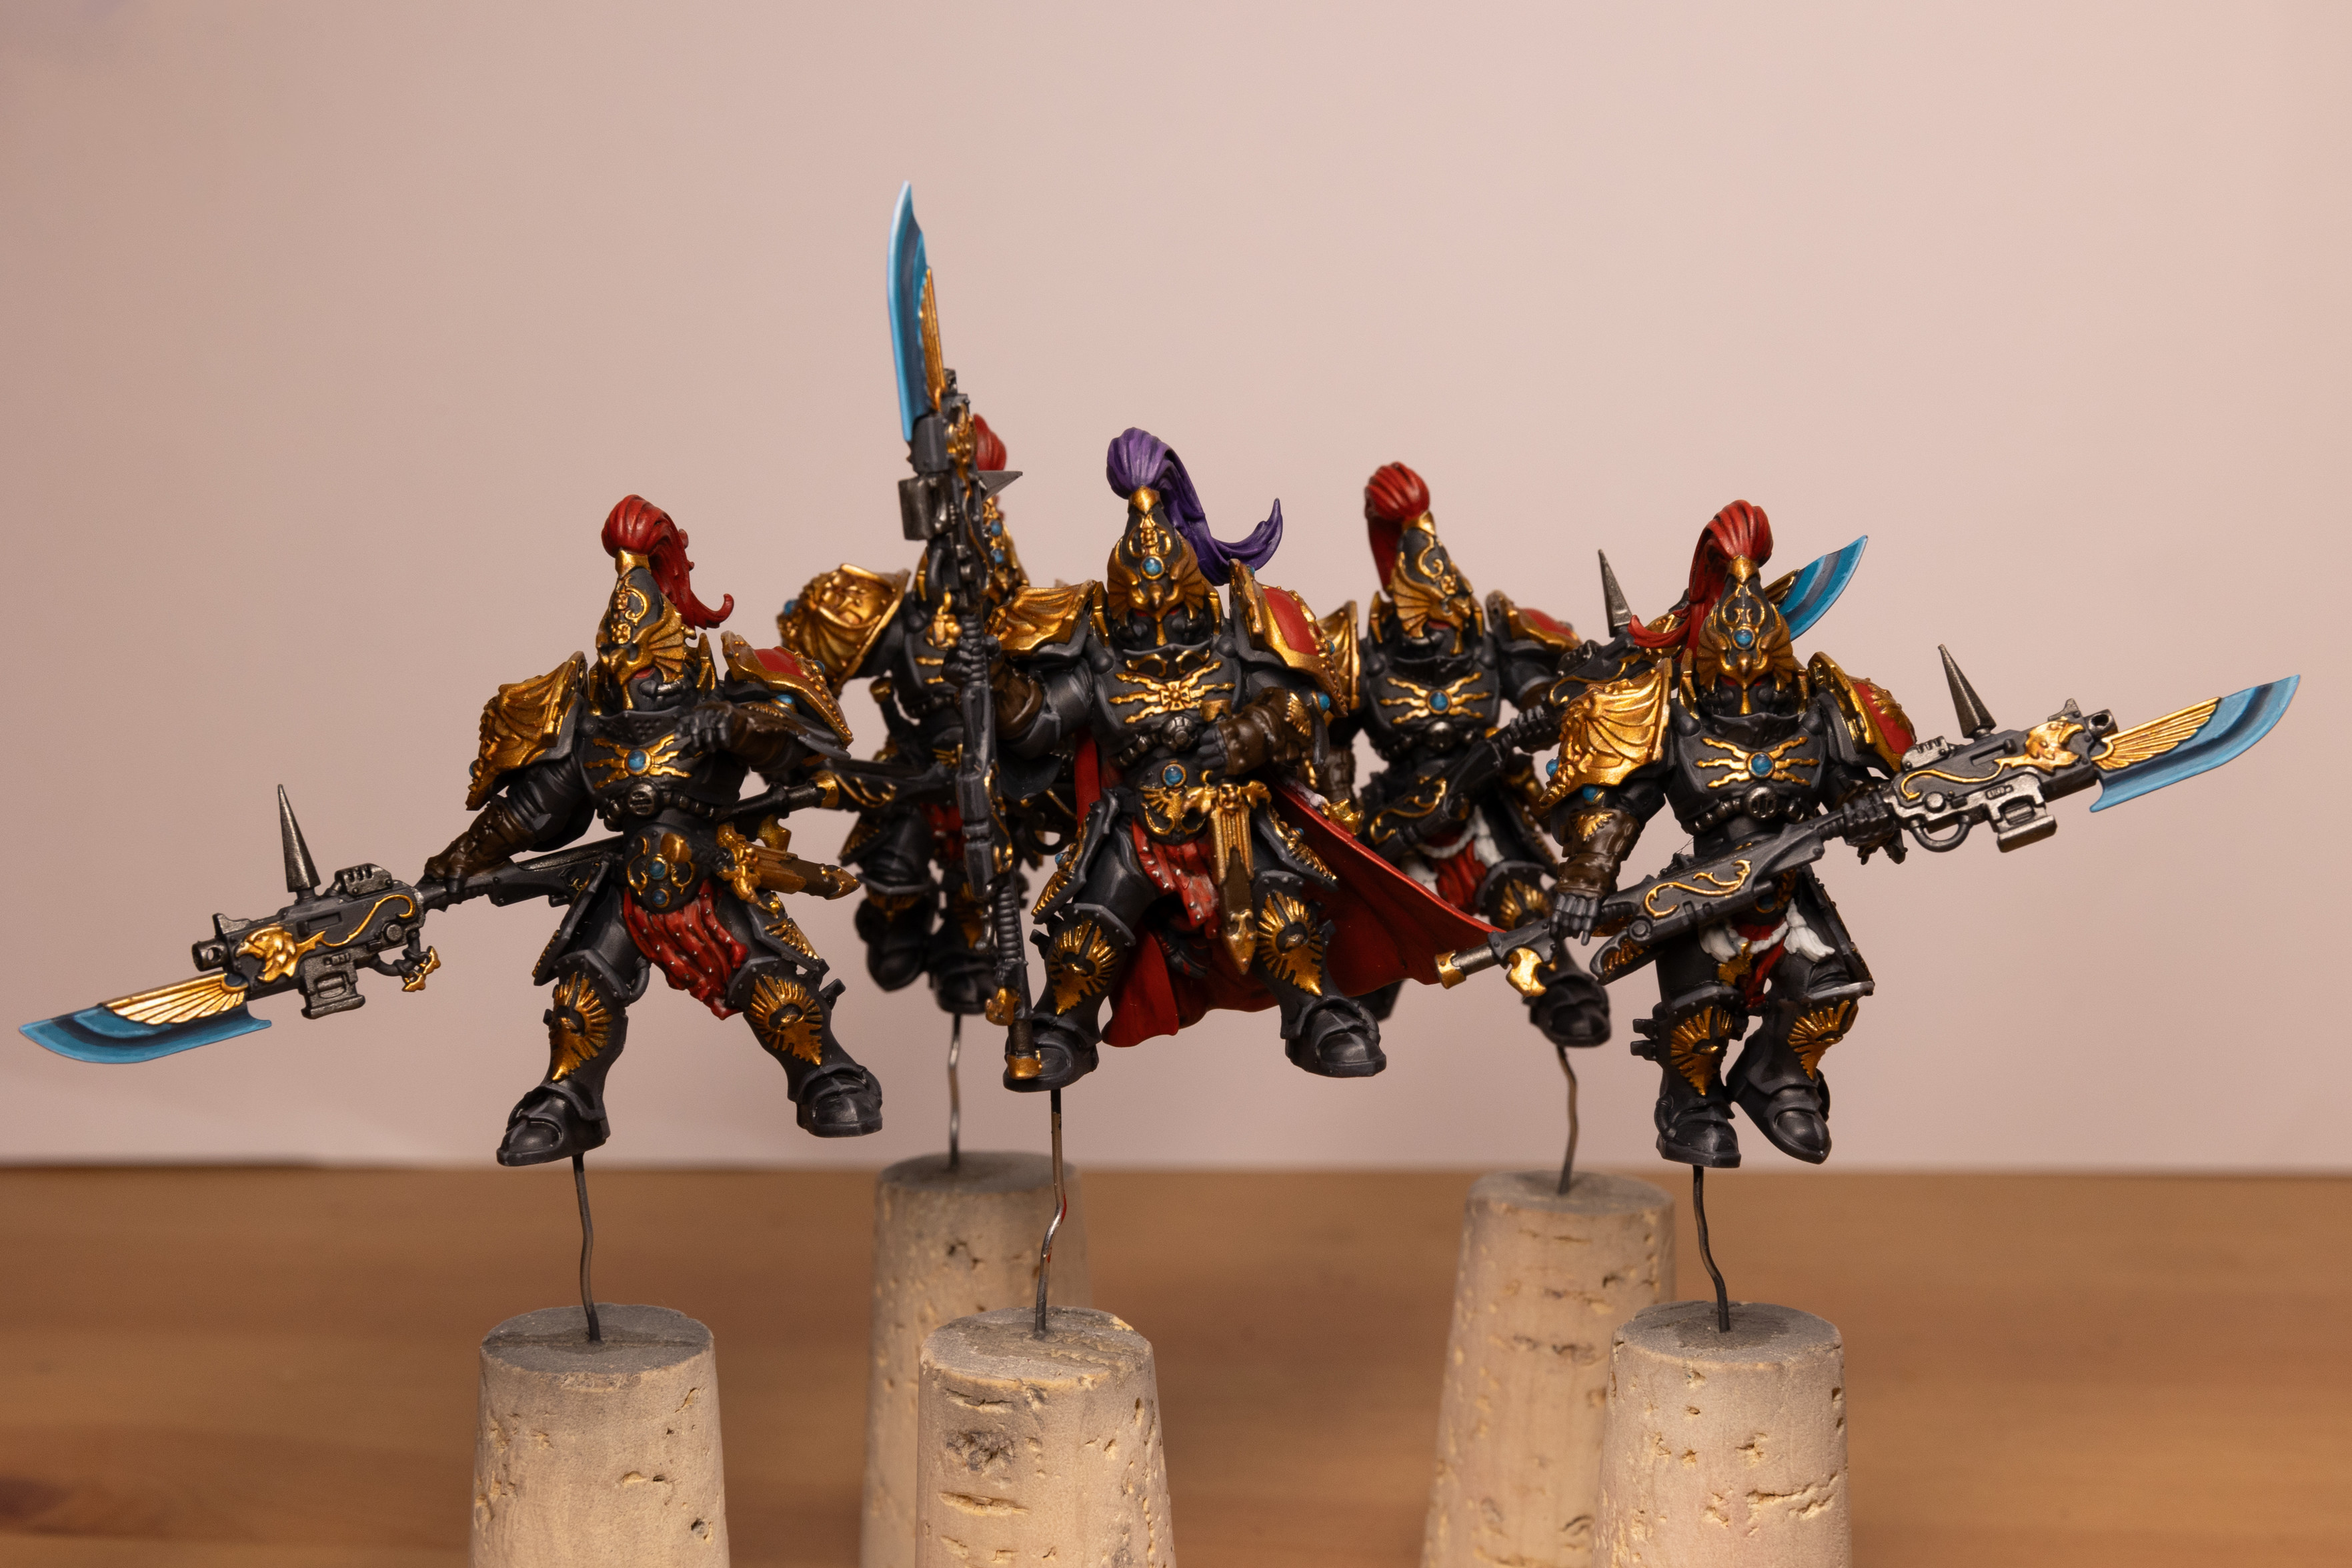 Five Warhammer 40k Custodian Guard in the Shadowkeepers color scheme. They are five tall armoured people in black armour with gold trim and red accents. They have tall helmets with plumes of hair, they are all red except the Captain in the middle who has a purple plume. They are all carrying spear weapons whose tips are an electric blue. All the models are mounted on metal sticks and corks.